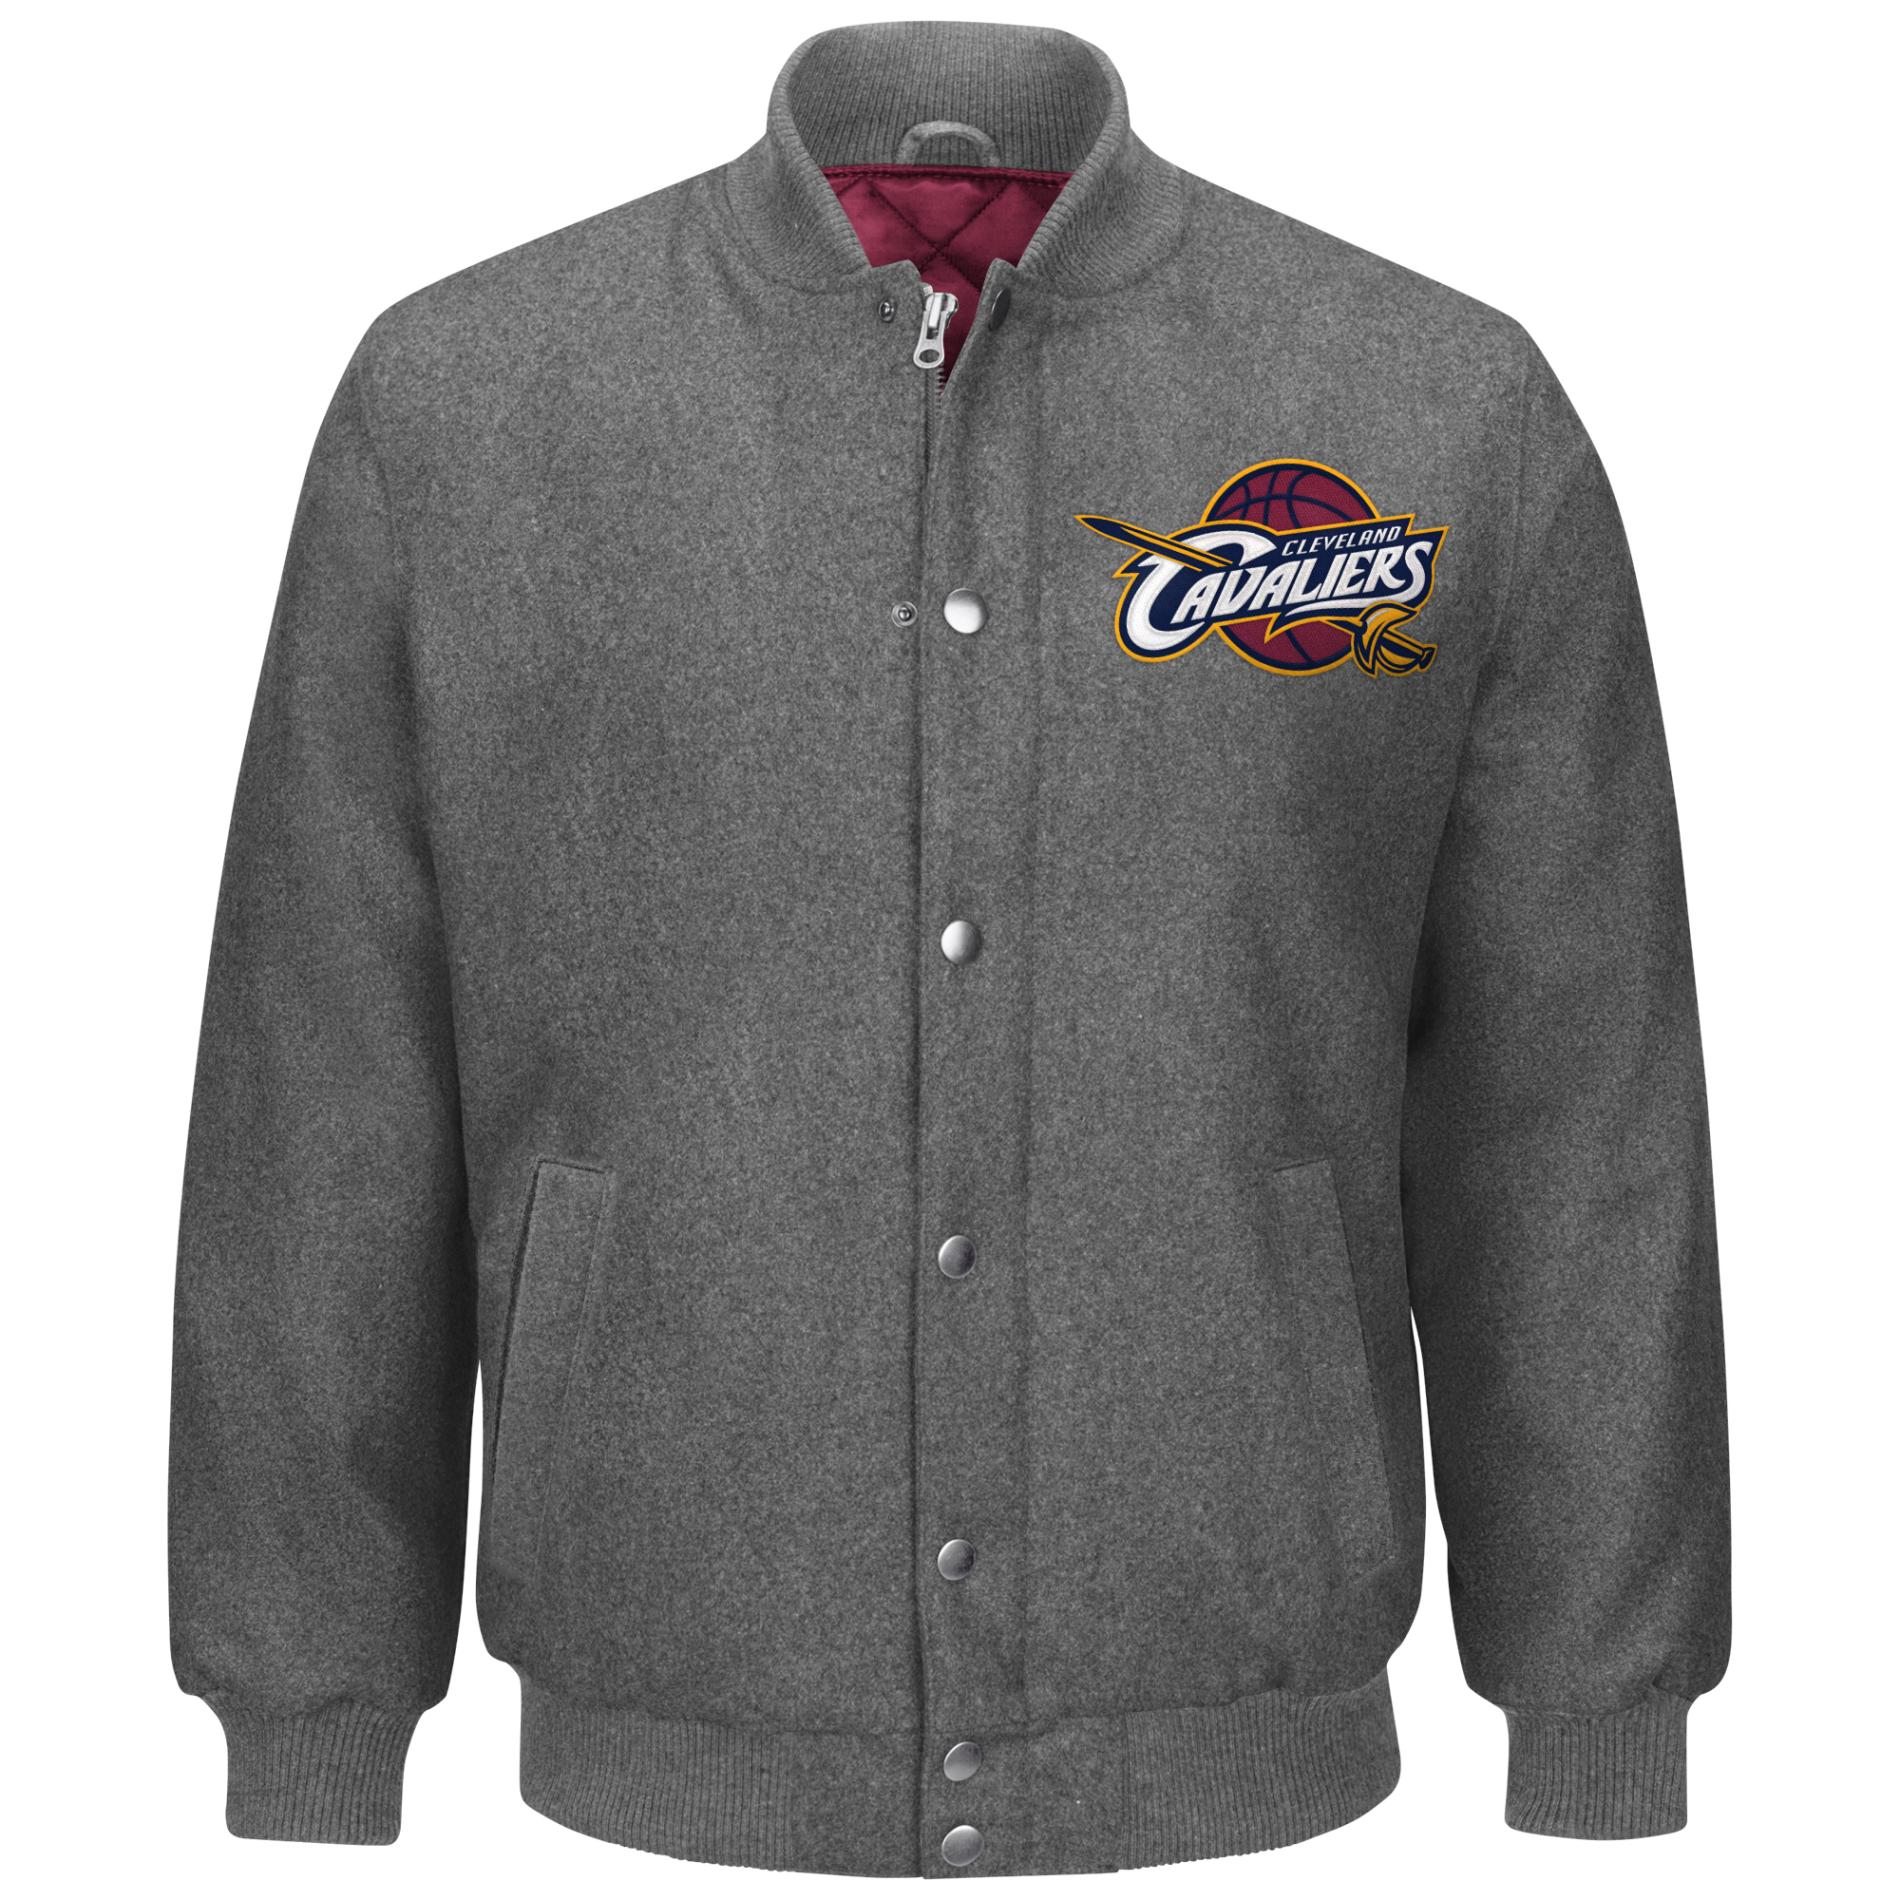 NBA(CANONICAL) Men's Jacket - Cleveland Cavaliers